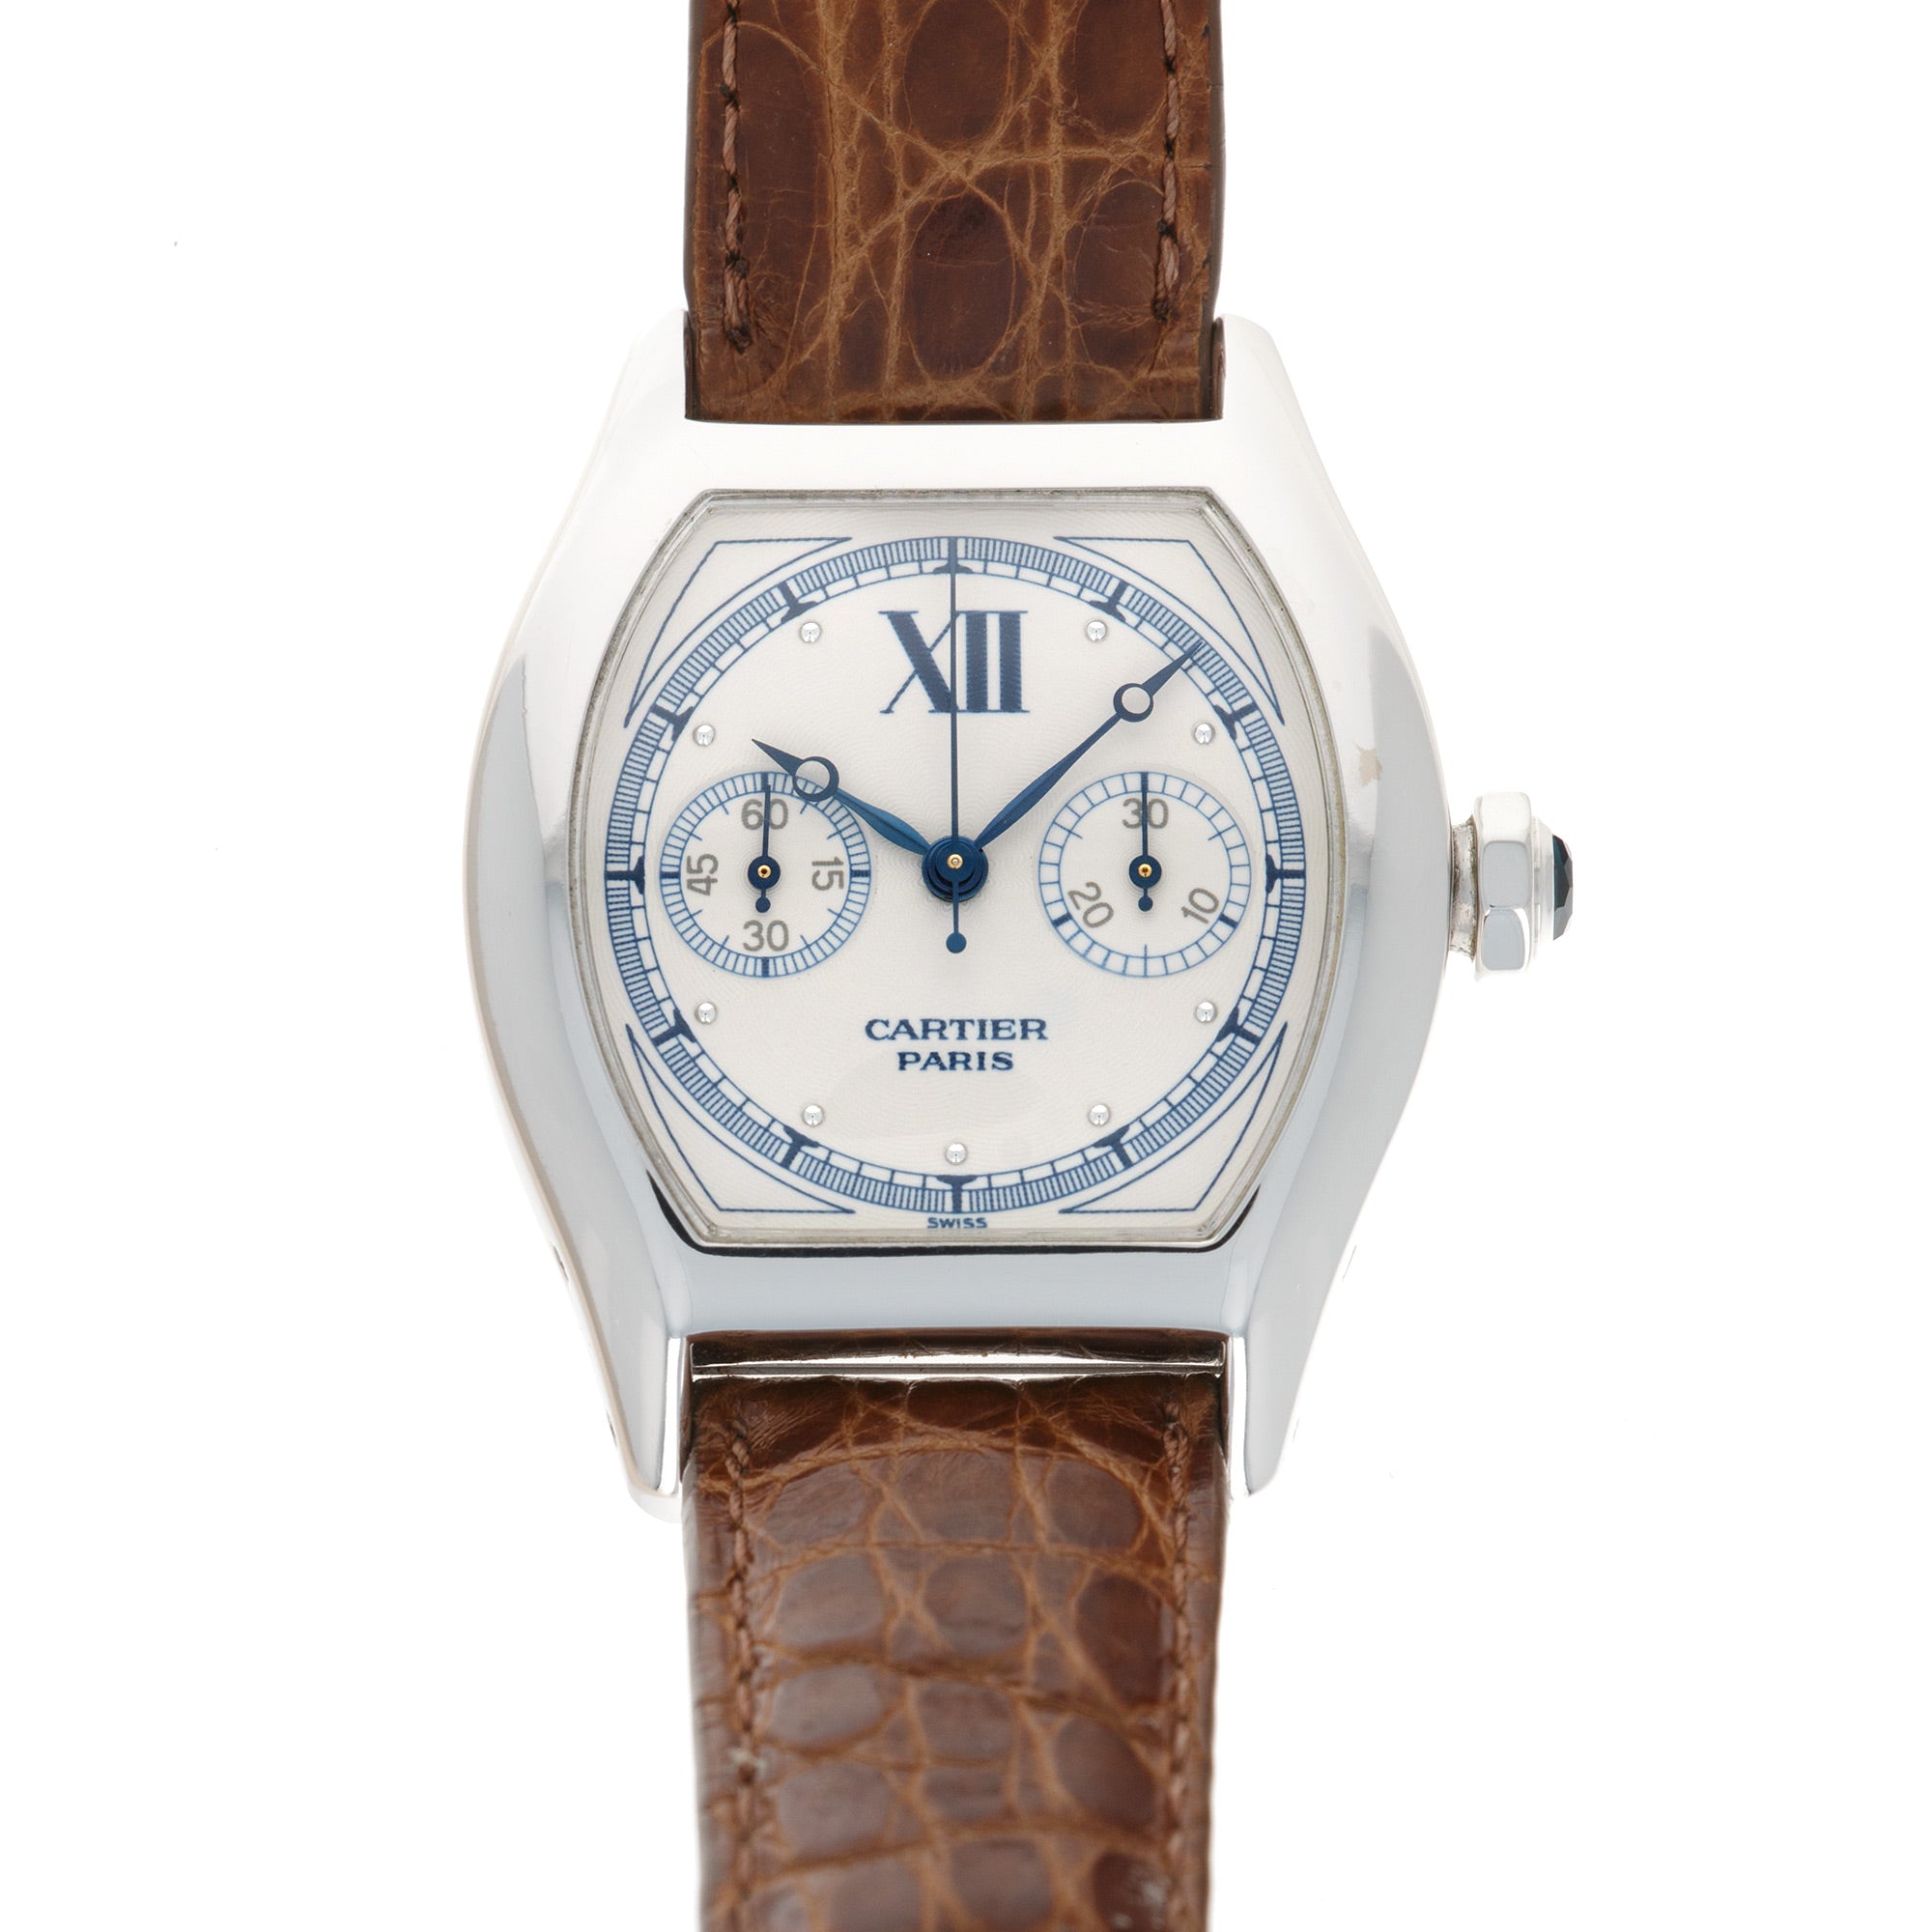 Cartier - Cartier White Gold Tortue Monopoussoir Chronograph Watch Ref. 2396 - The Keystone Watches